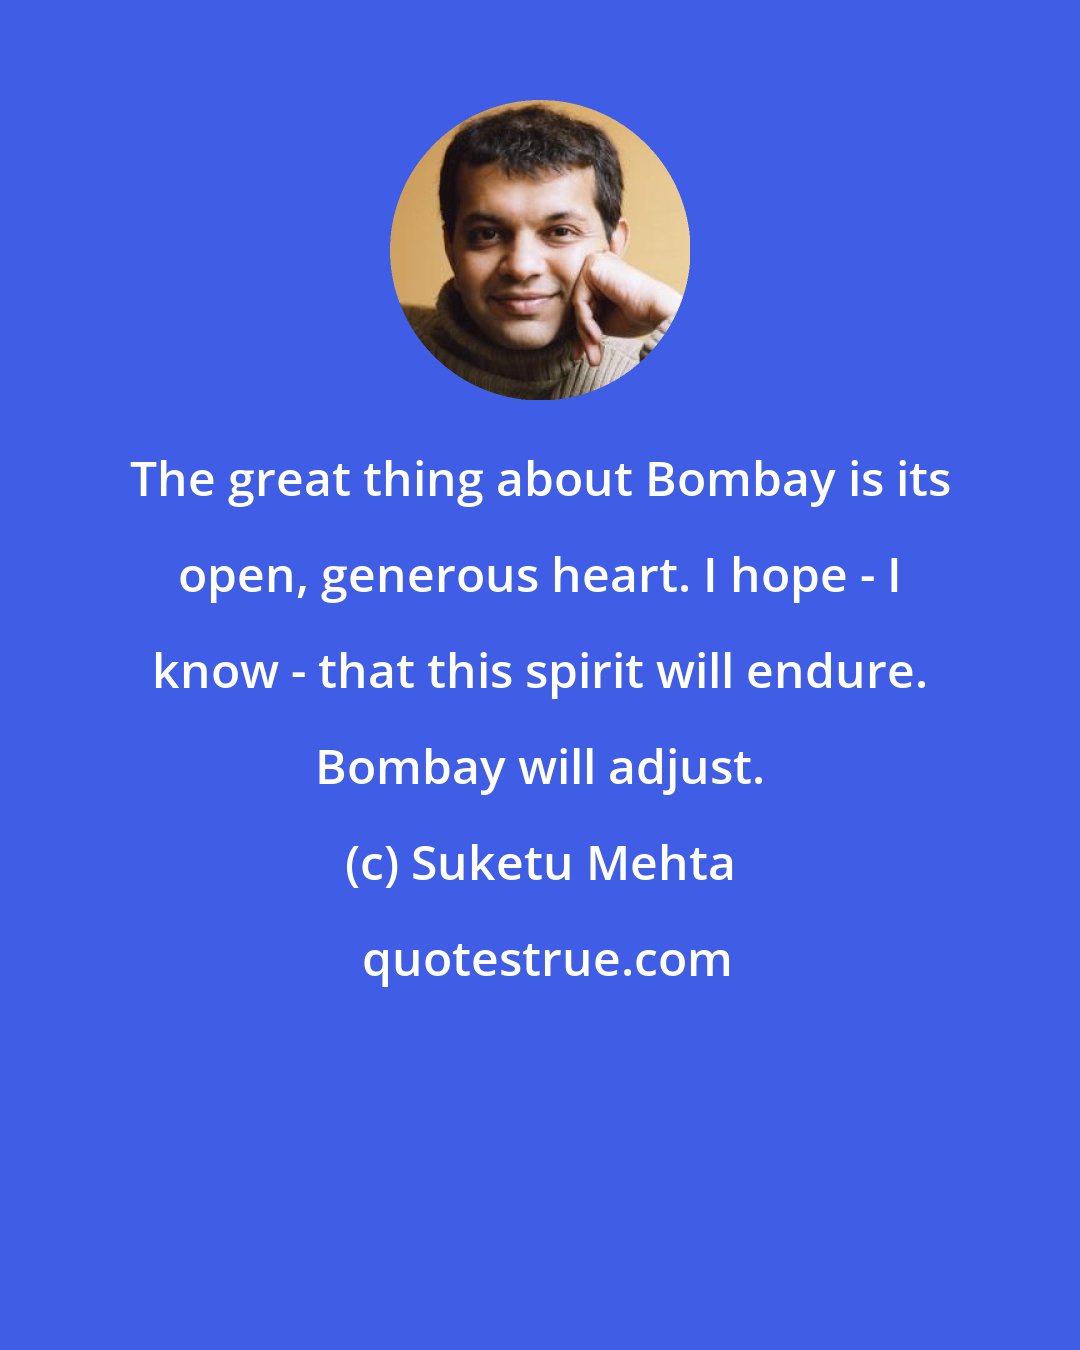 Suketu Mehta: The great thing about Bombay is its open, generous heart. I hope - I know - that this spirit will endure. Bombay will adjust.